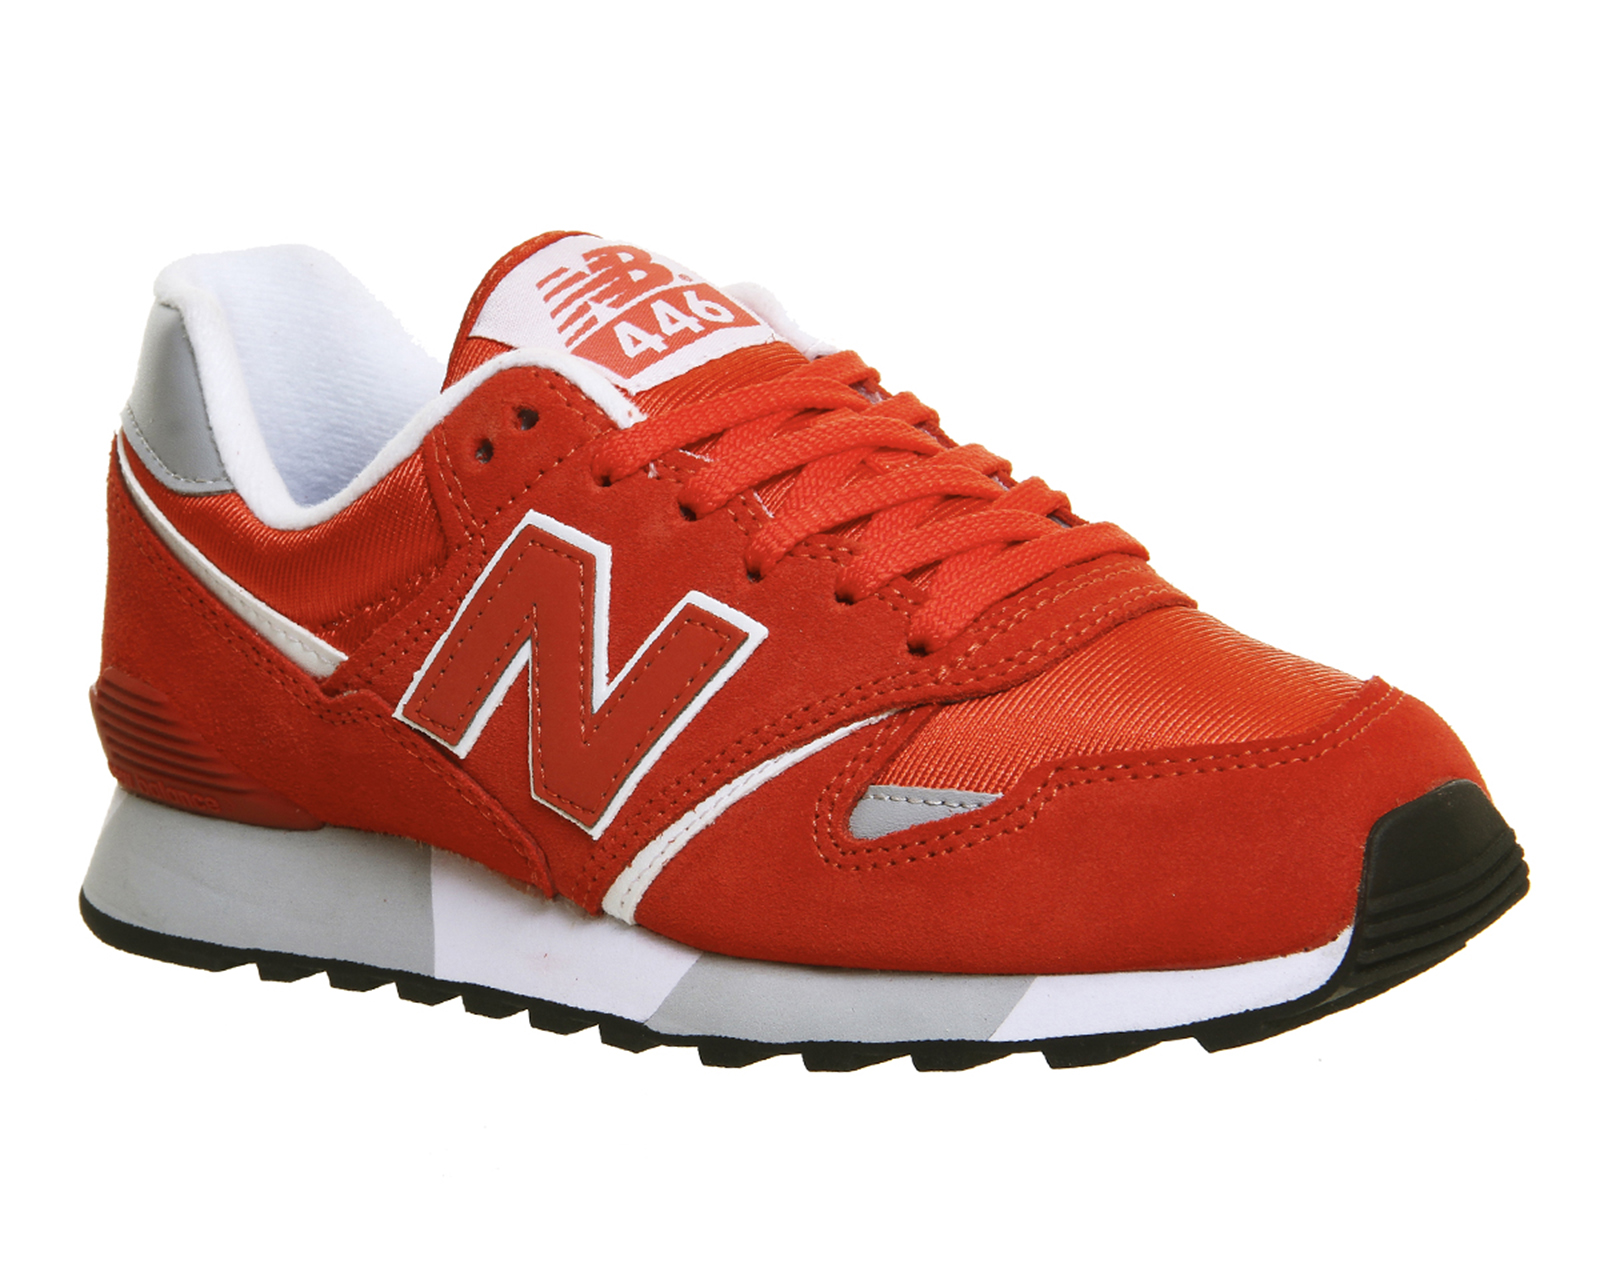 446 new balance Shop Clothing & Shoes Online